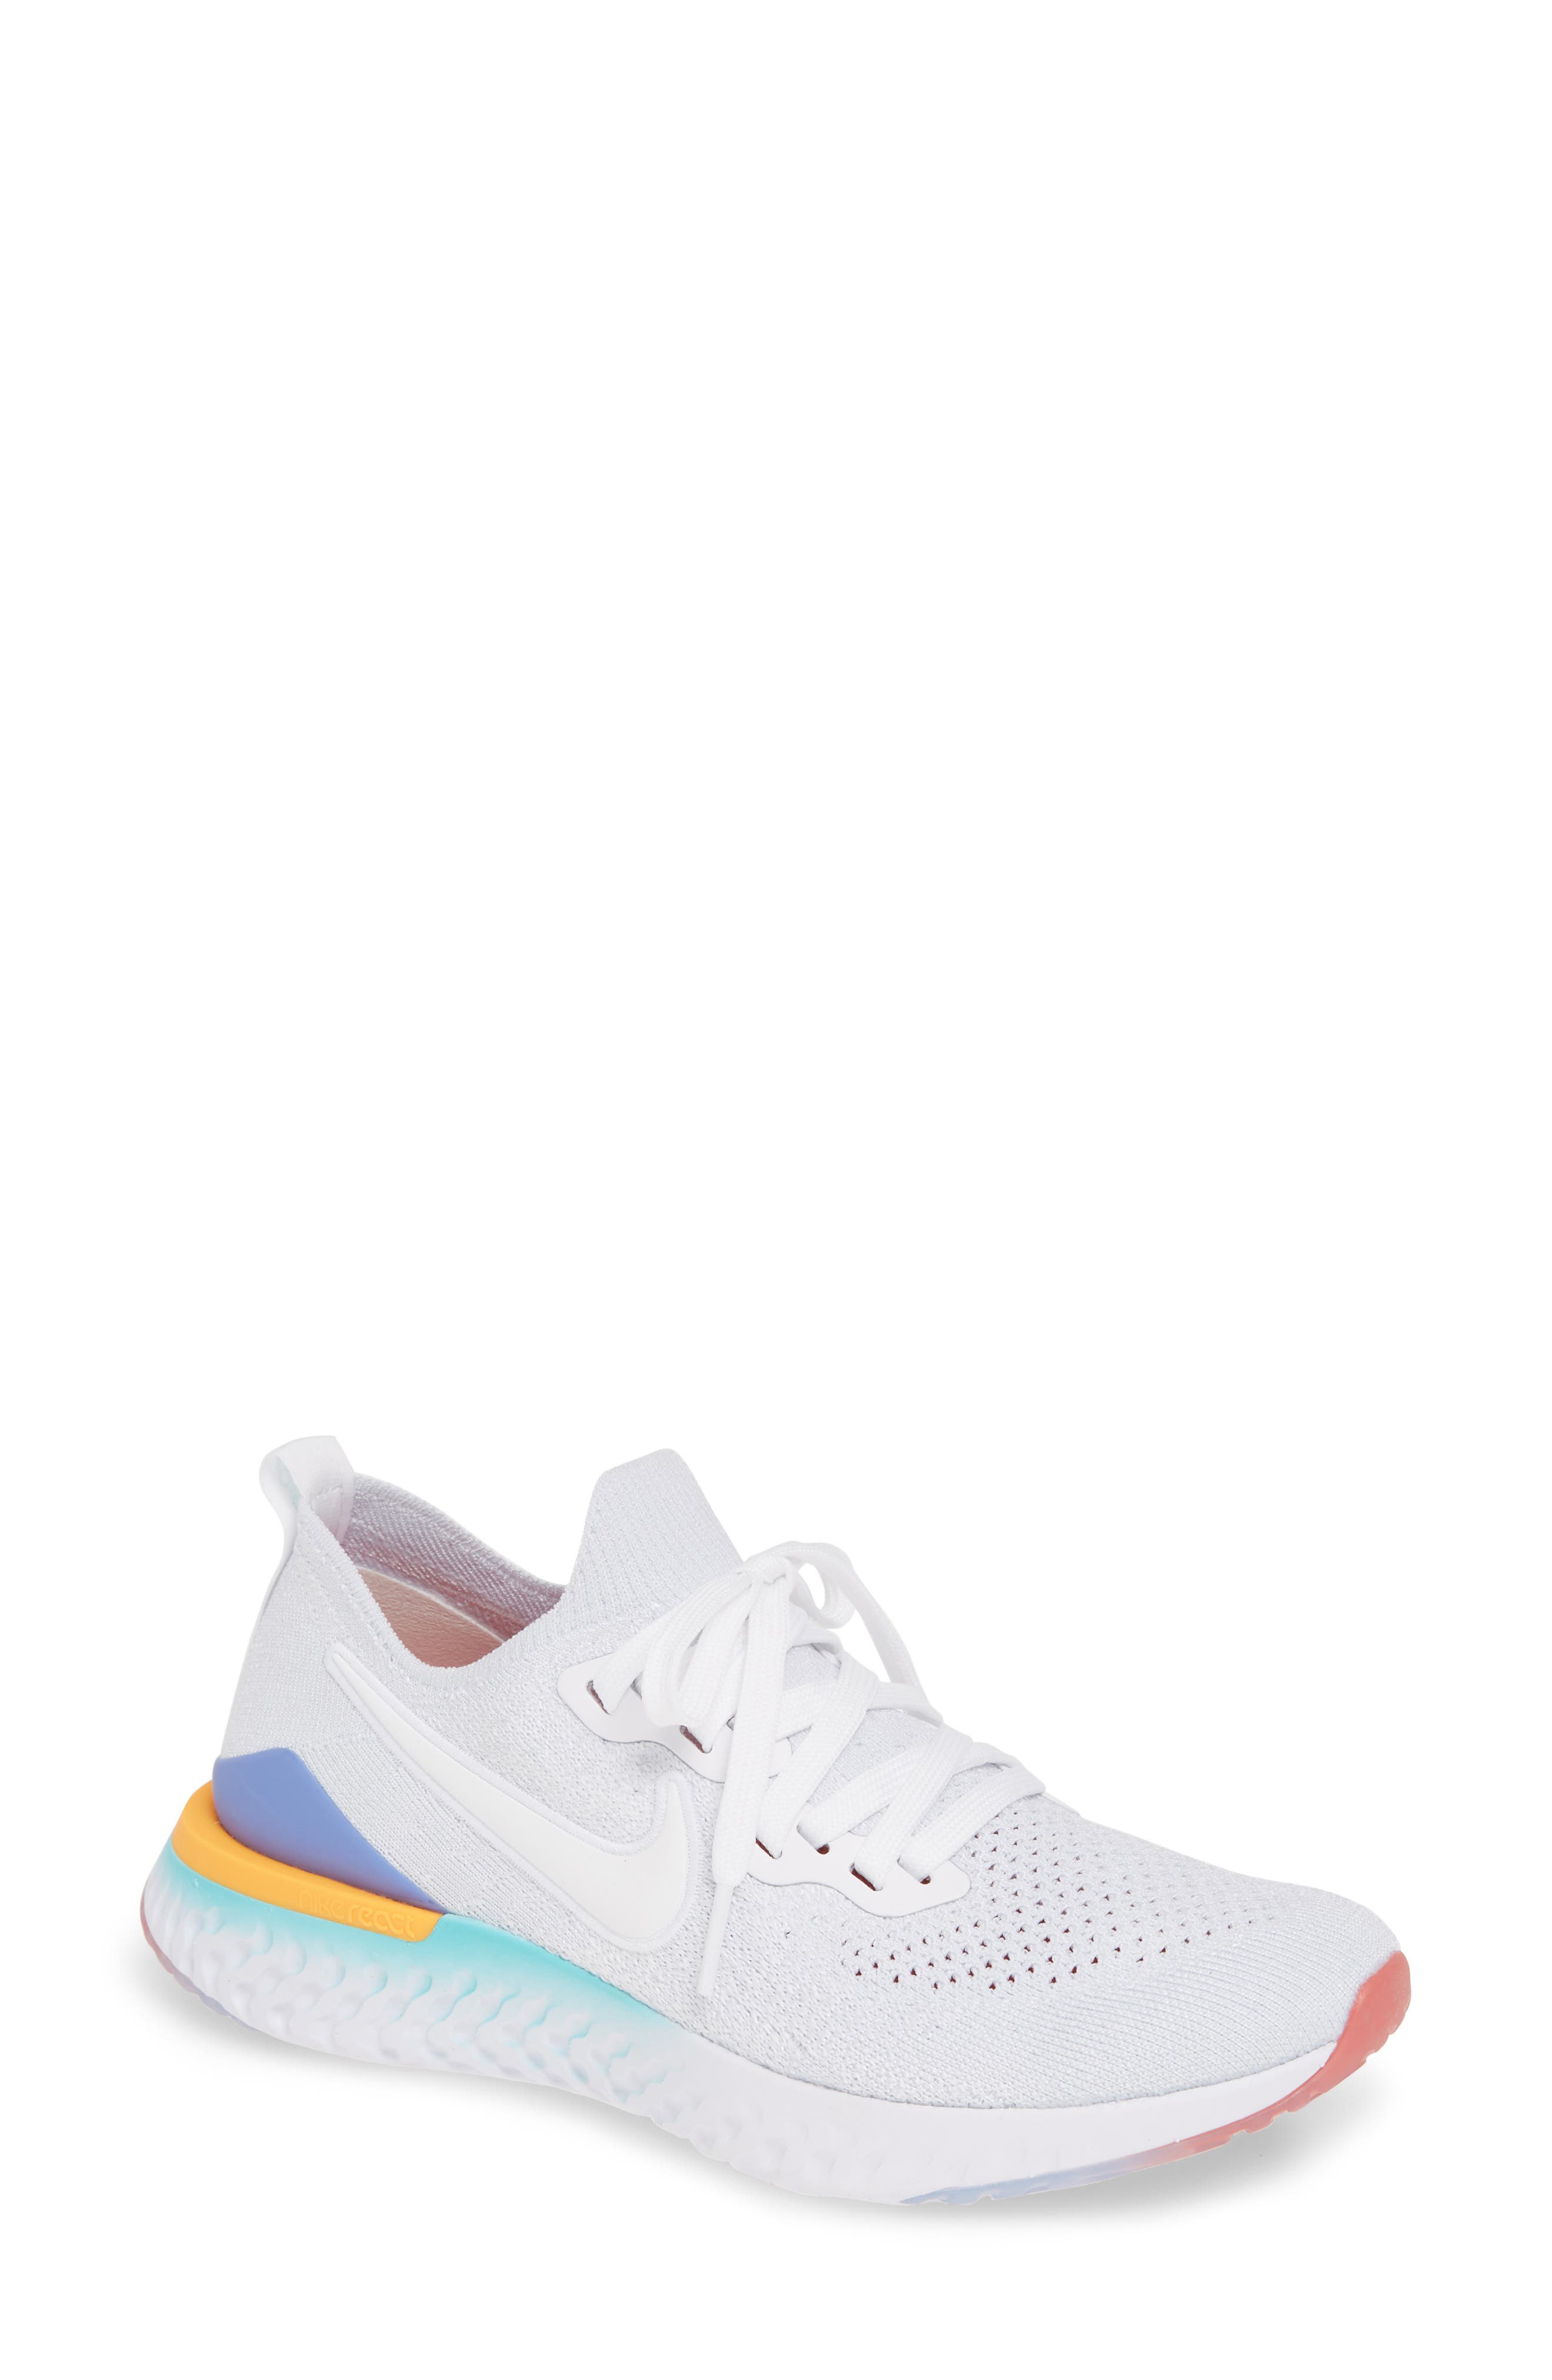 nordstrom epic react flyknit